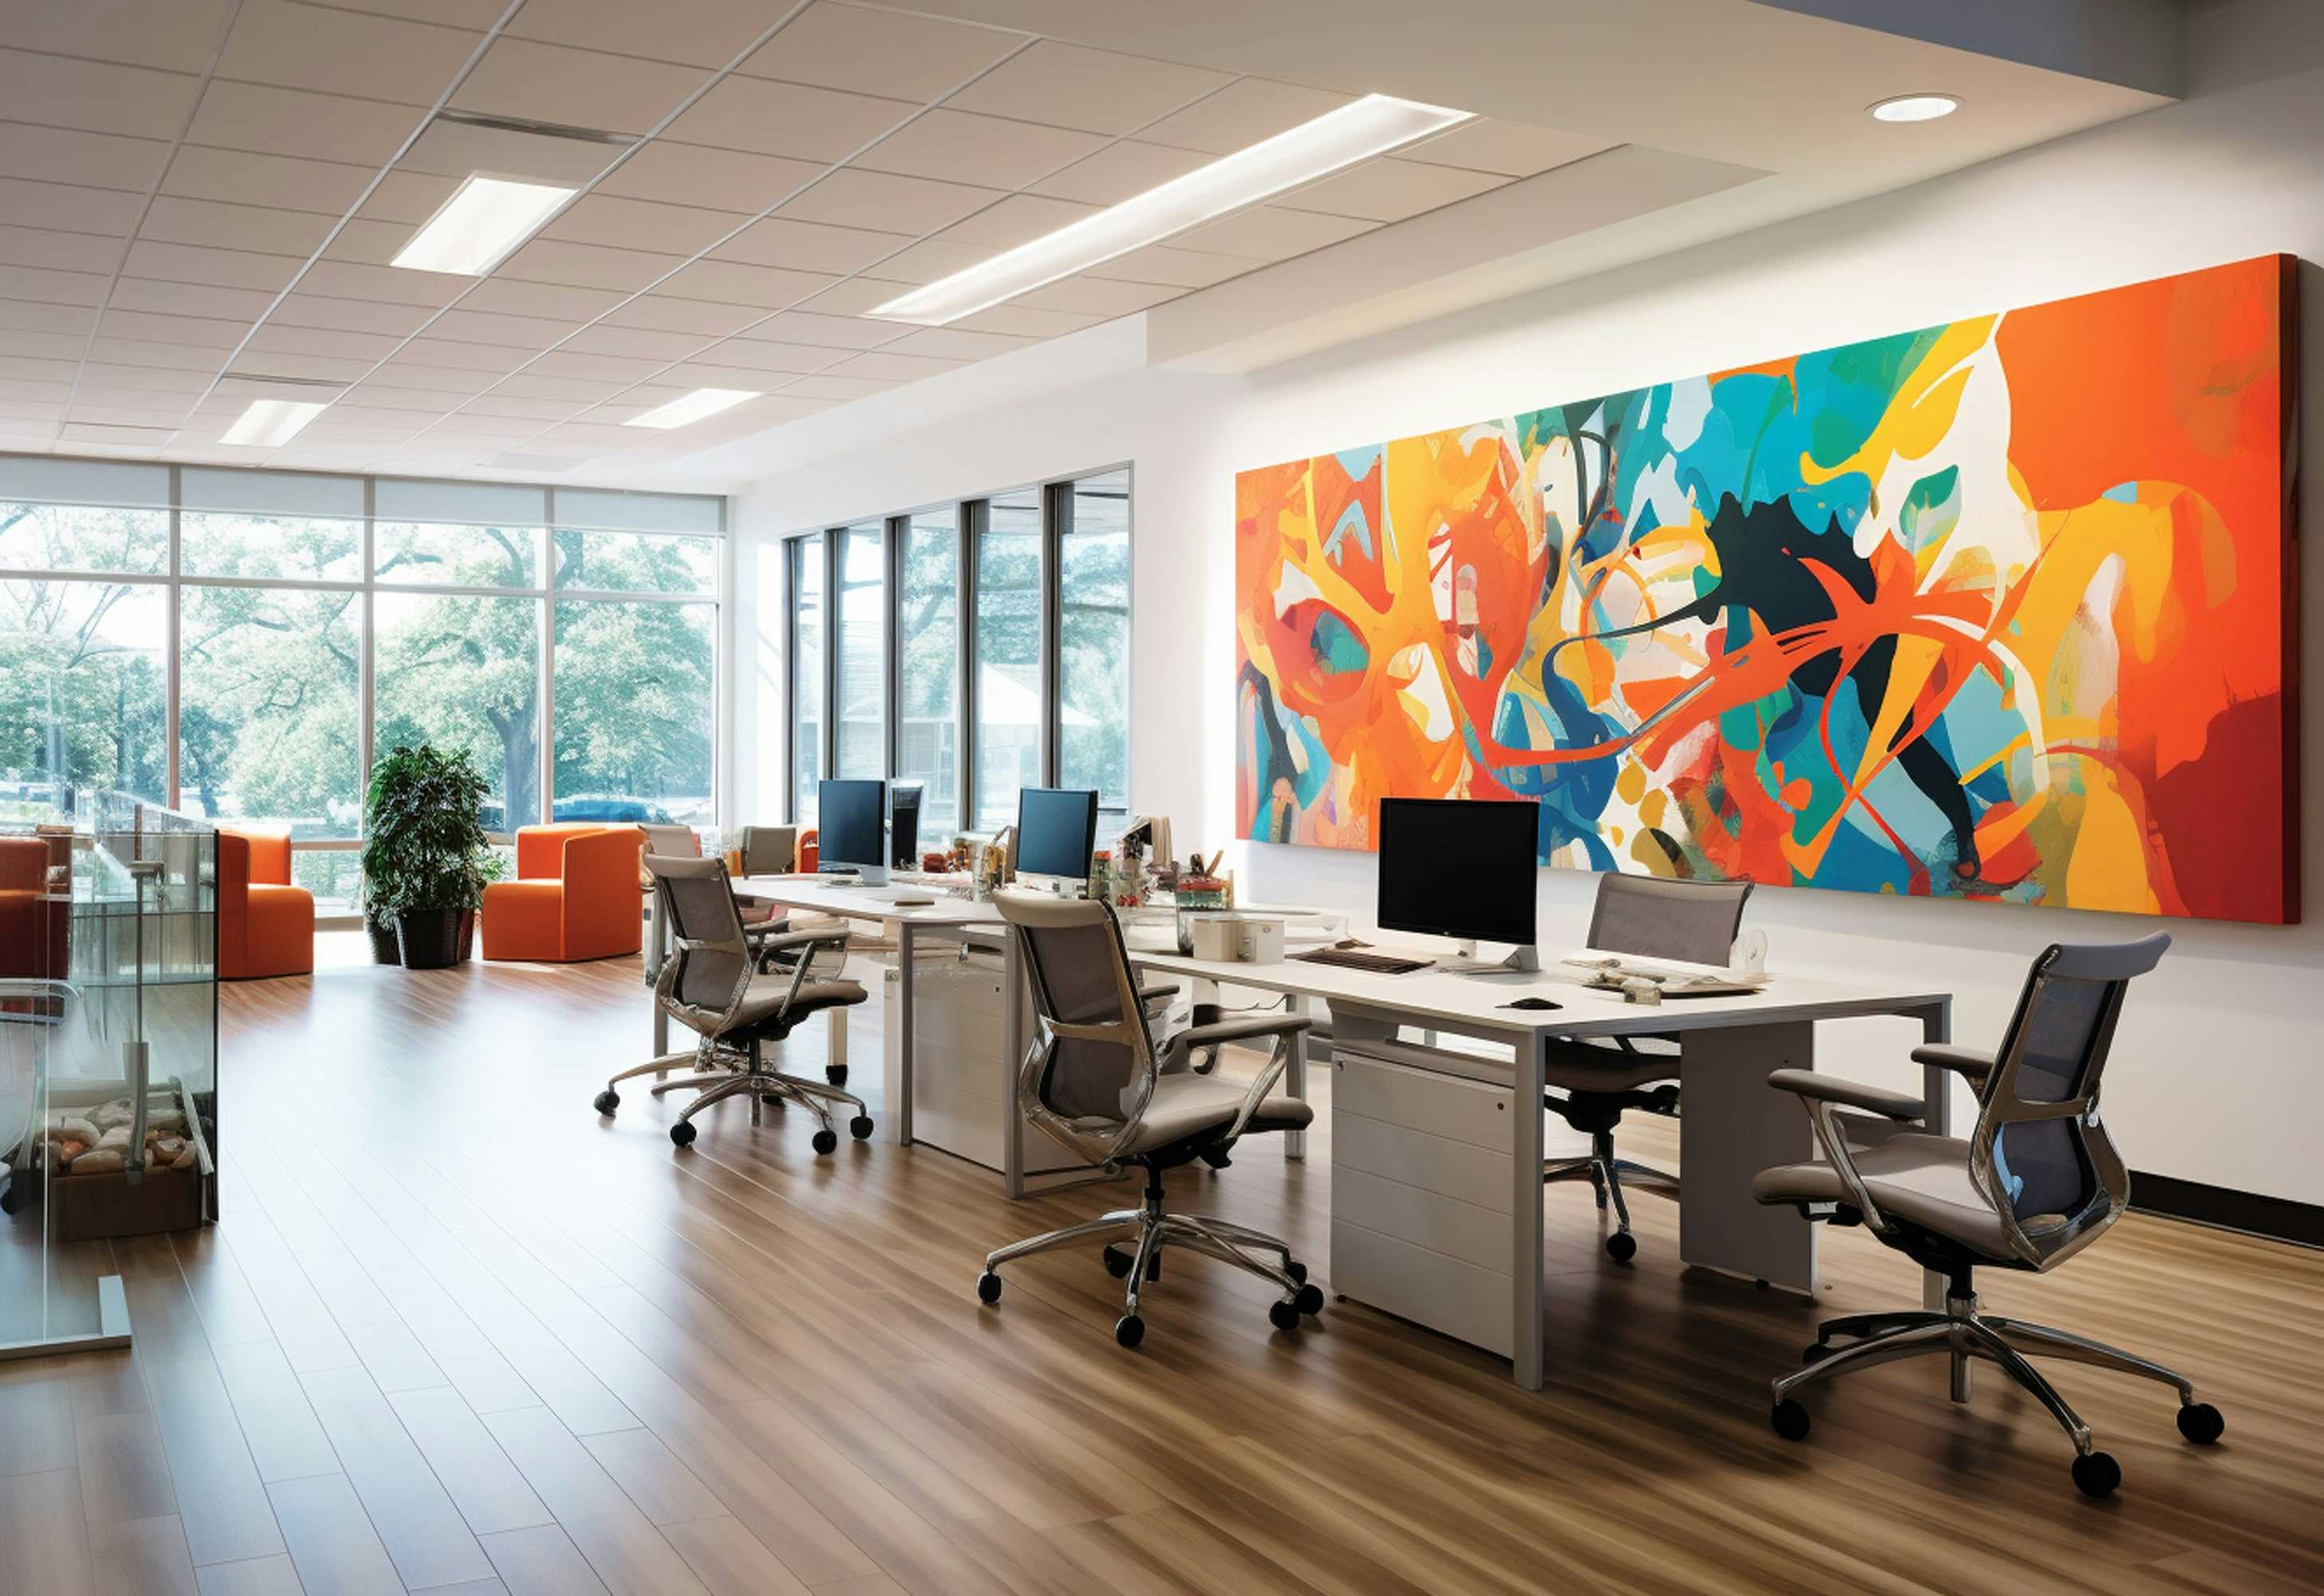 Image Showcases Vibrant Contemporary Office